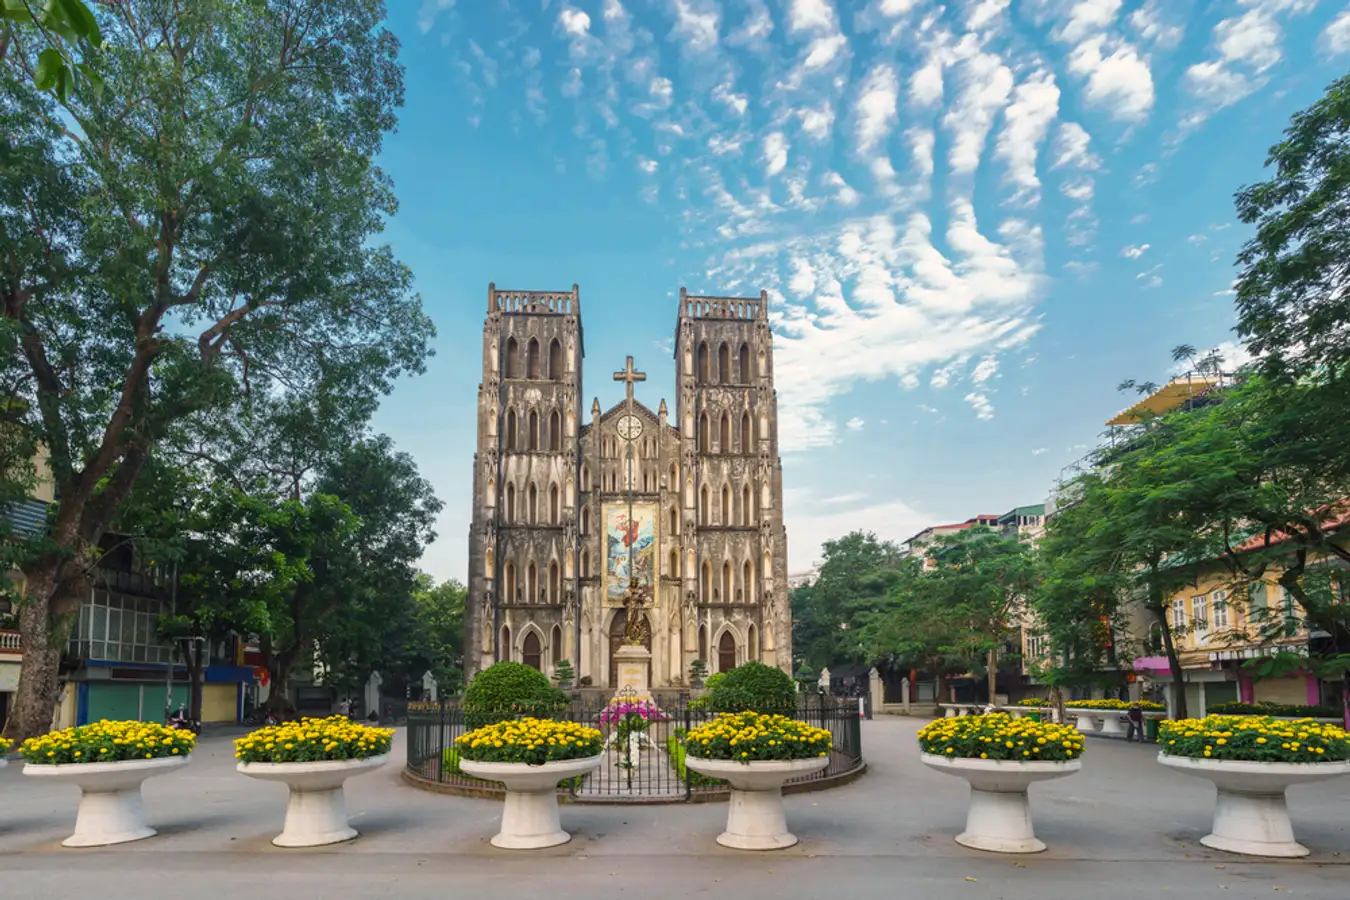 The Hanoi Big Church, also known as St. Joseph's Cathedral, is an iconic landmark in the heart of Hanoi, Vietnam, showcasing stunning French Gothic architecture.